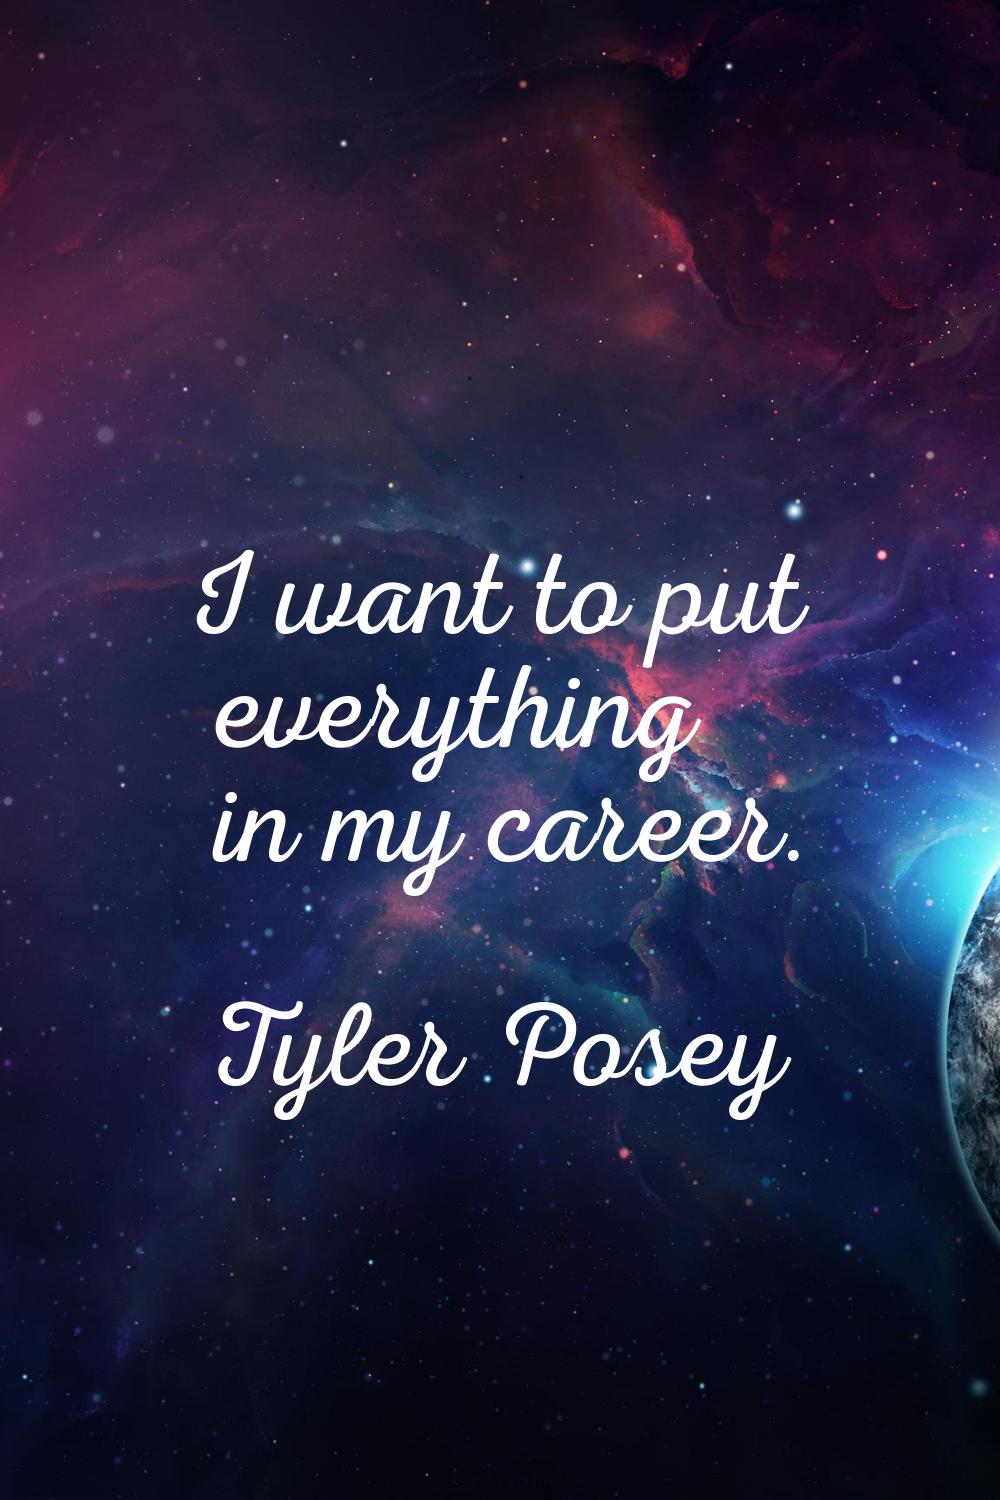 I want to put everything in my career.